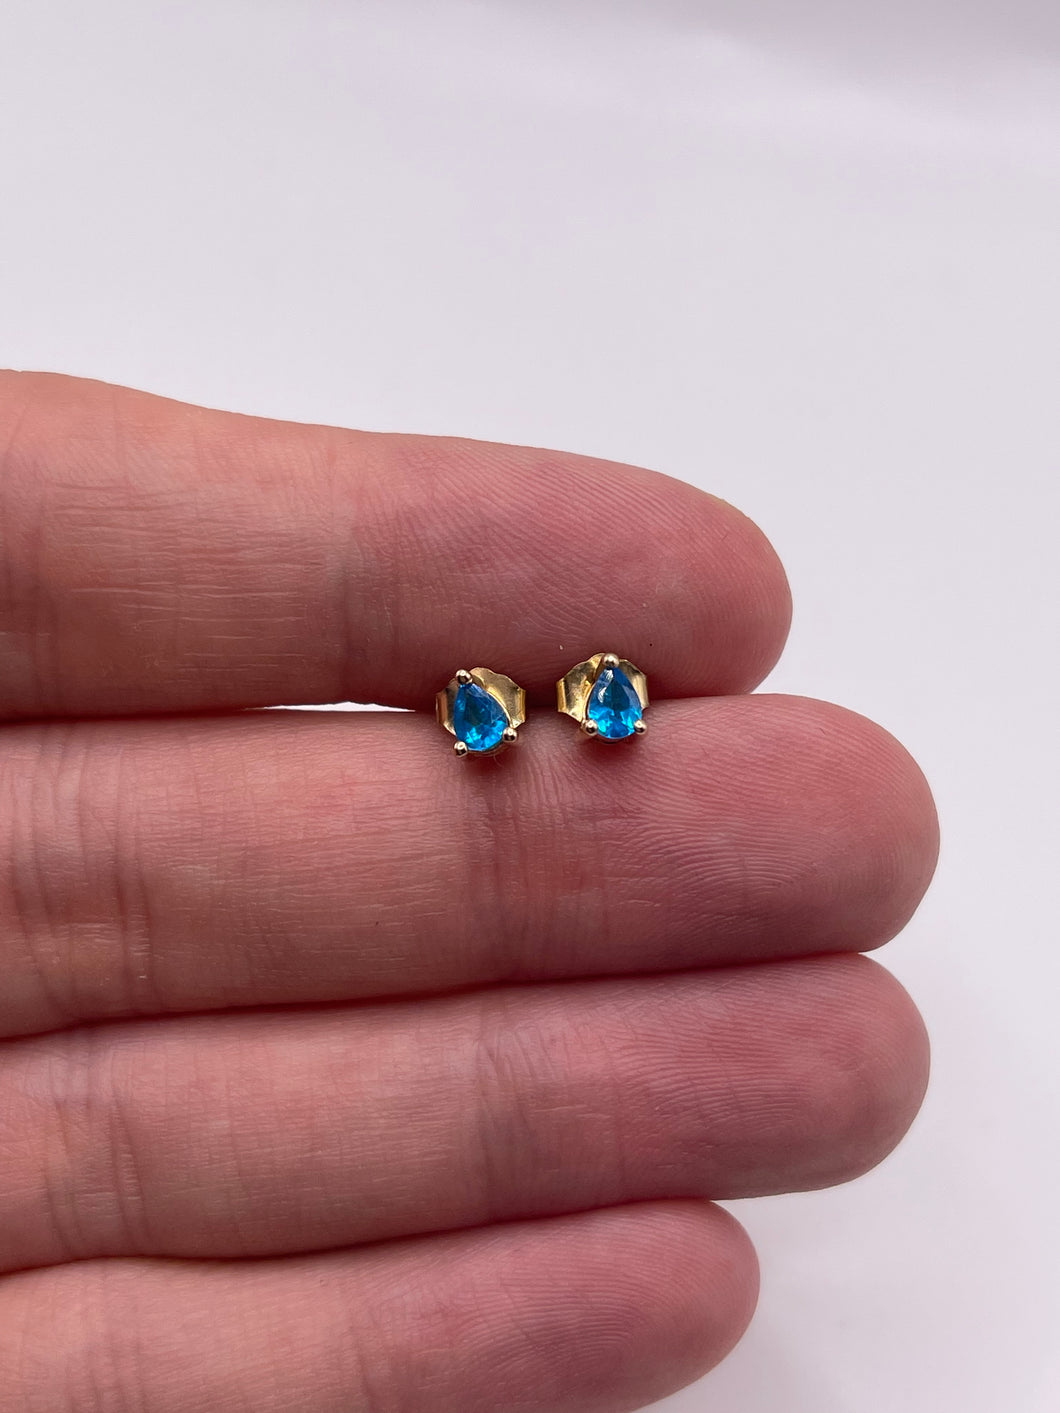 9ct gold blue apatite earrings